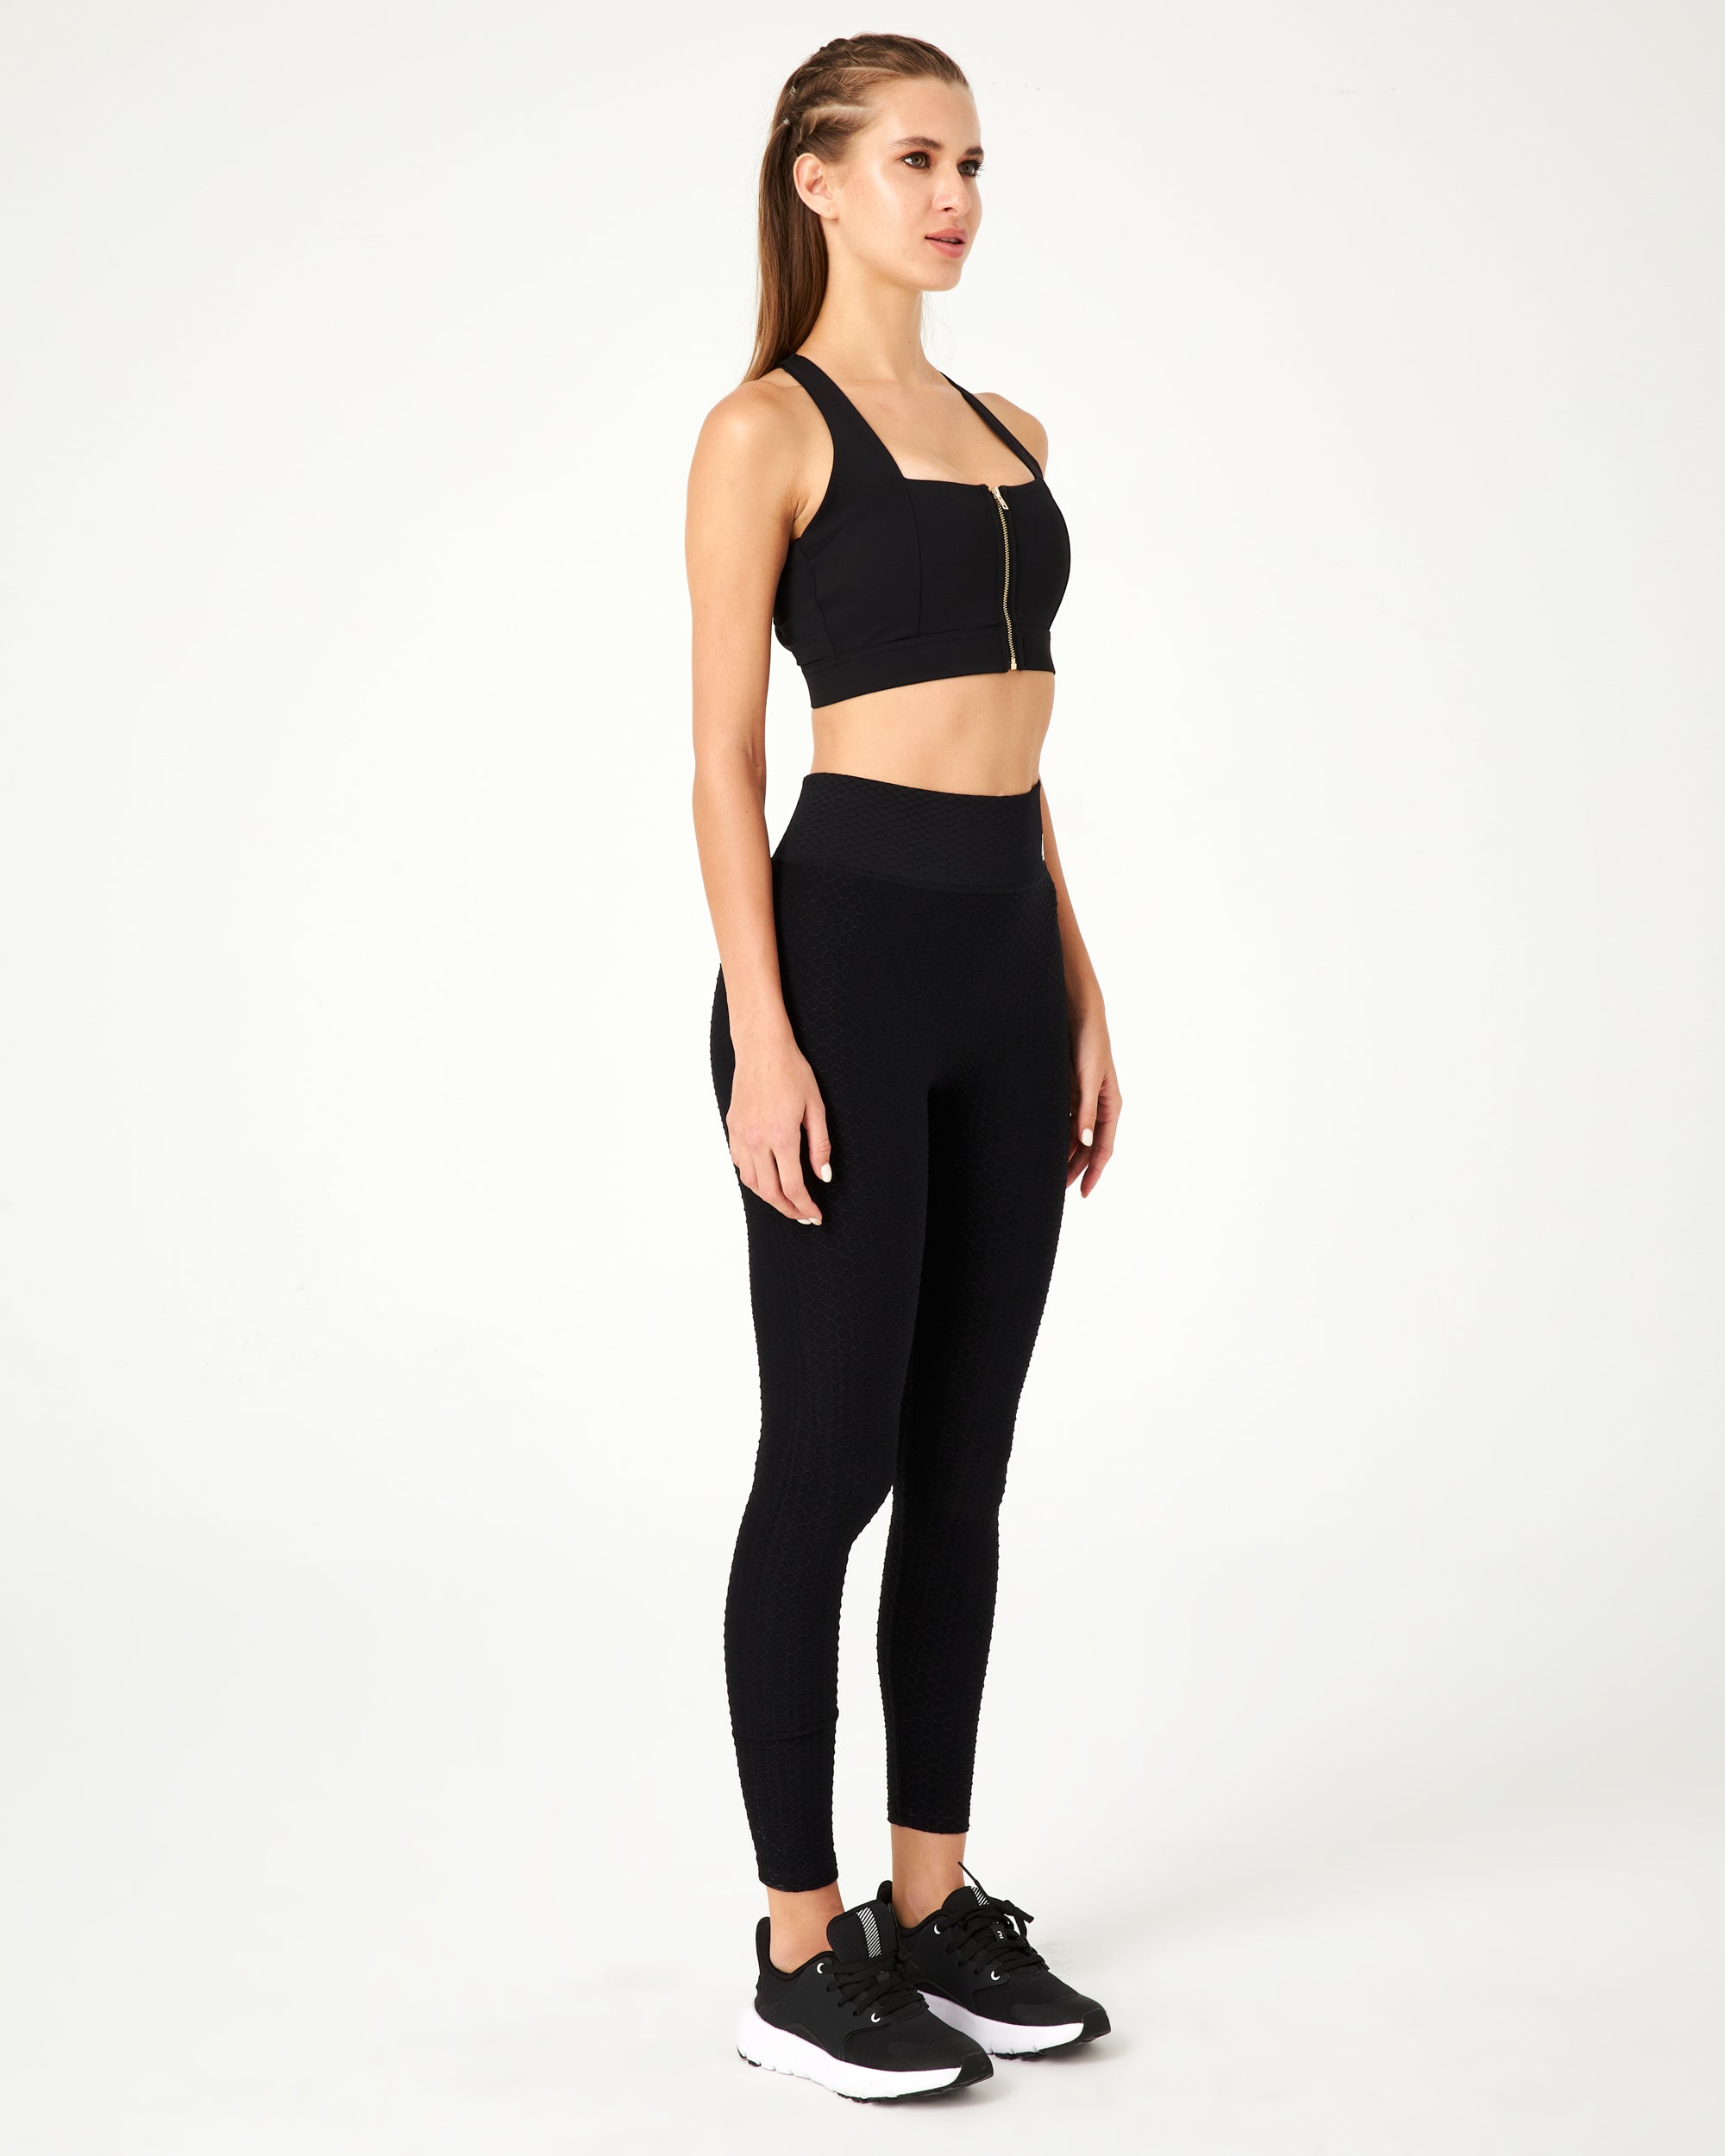 Buy Fabluk® Elite Performance Zip-Front Sports Bra  Longline, Supportive  Workout & Yoga Top with Enhanced Comfort with Free Bella VOSTE Eye Makeup  Combo (Black, M) at